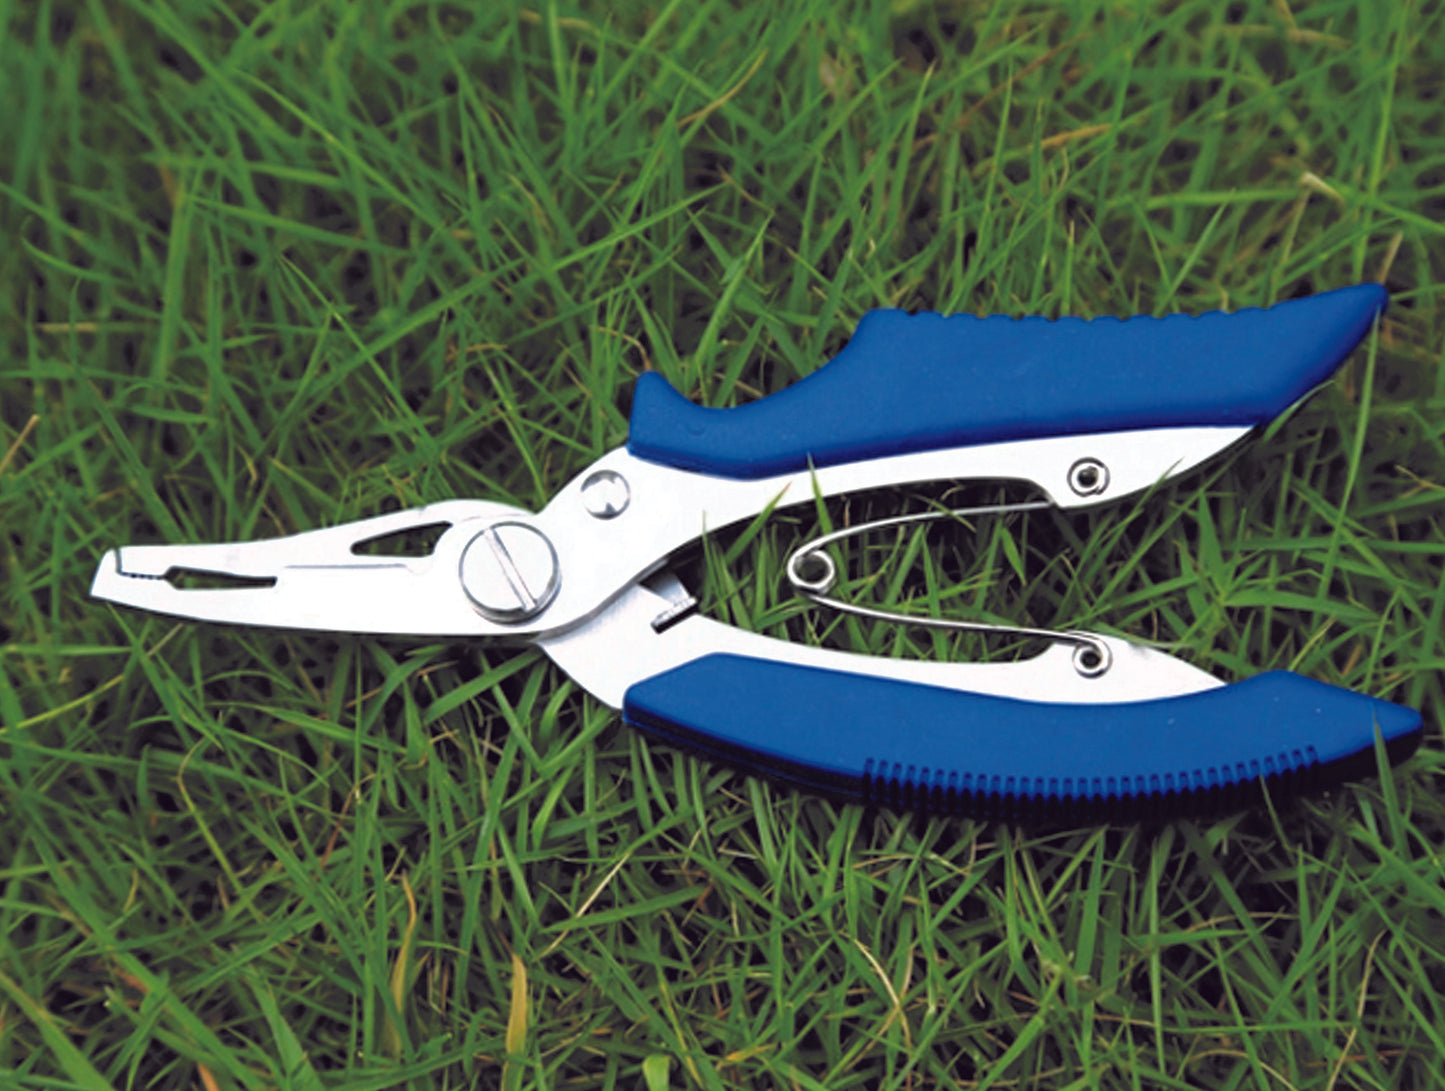 Stainless Steel Fishing Pliers Braid Cutter Split Ring Hook Remover Tool